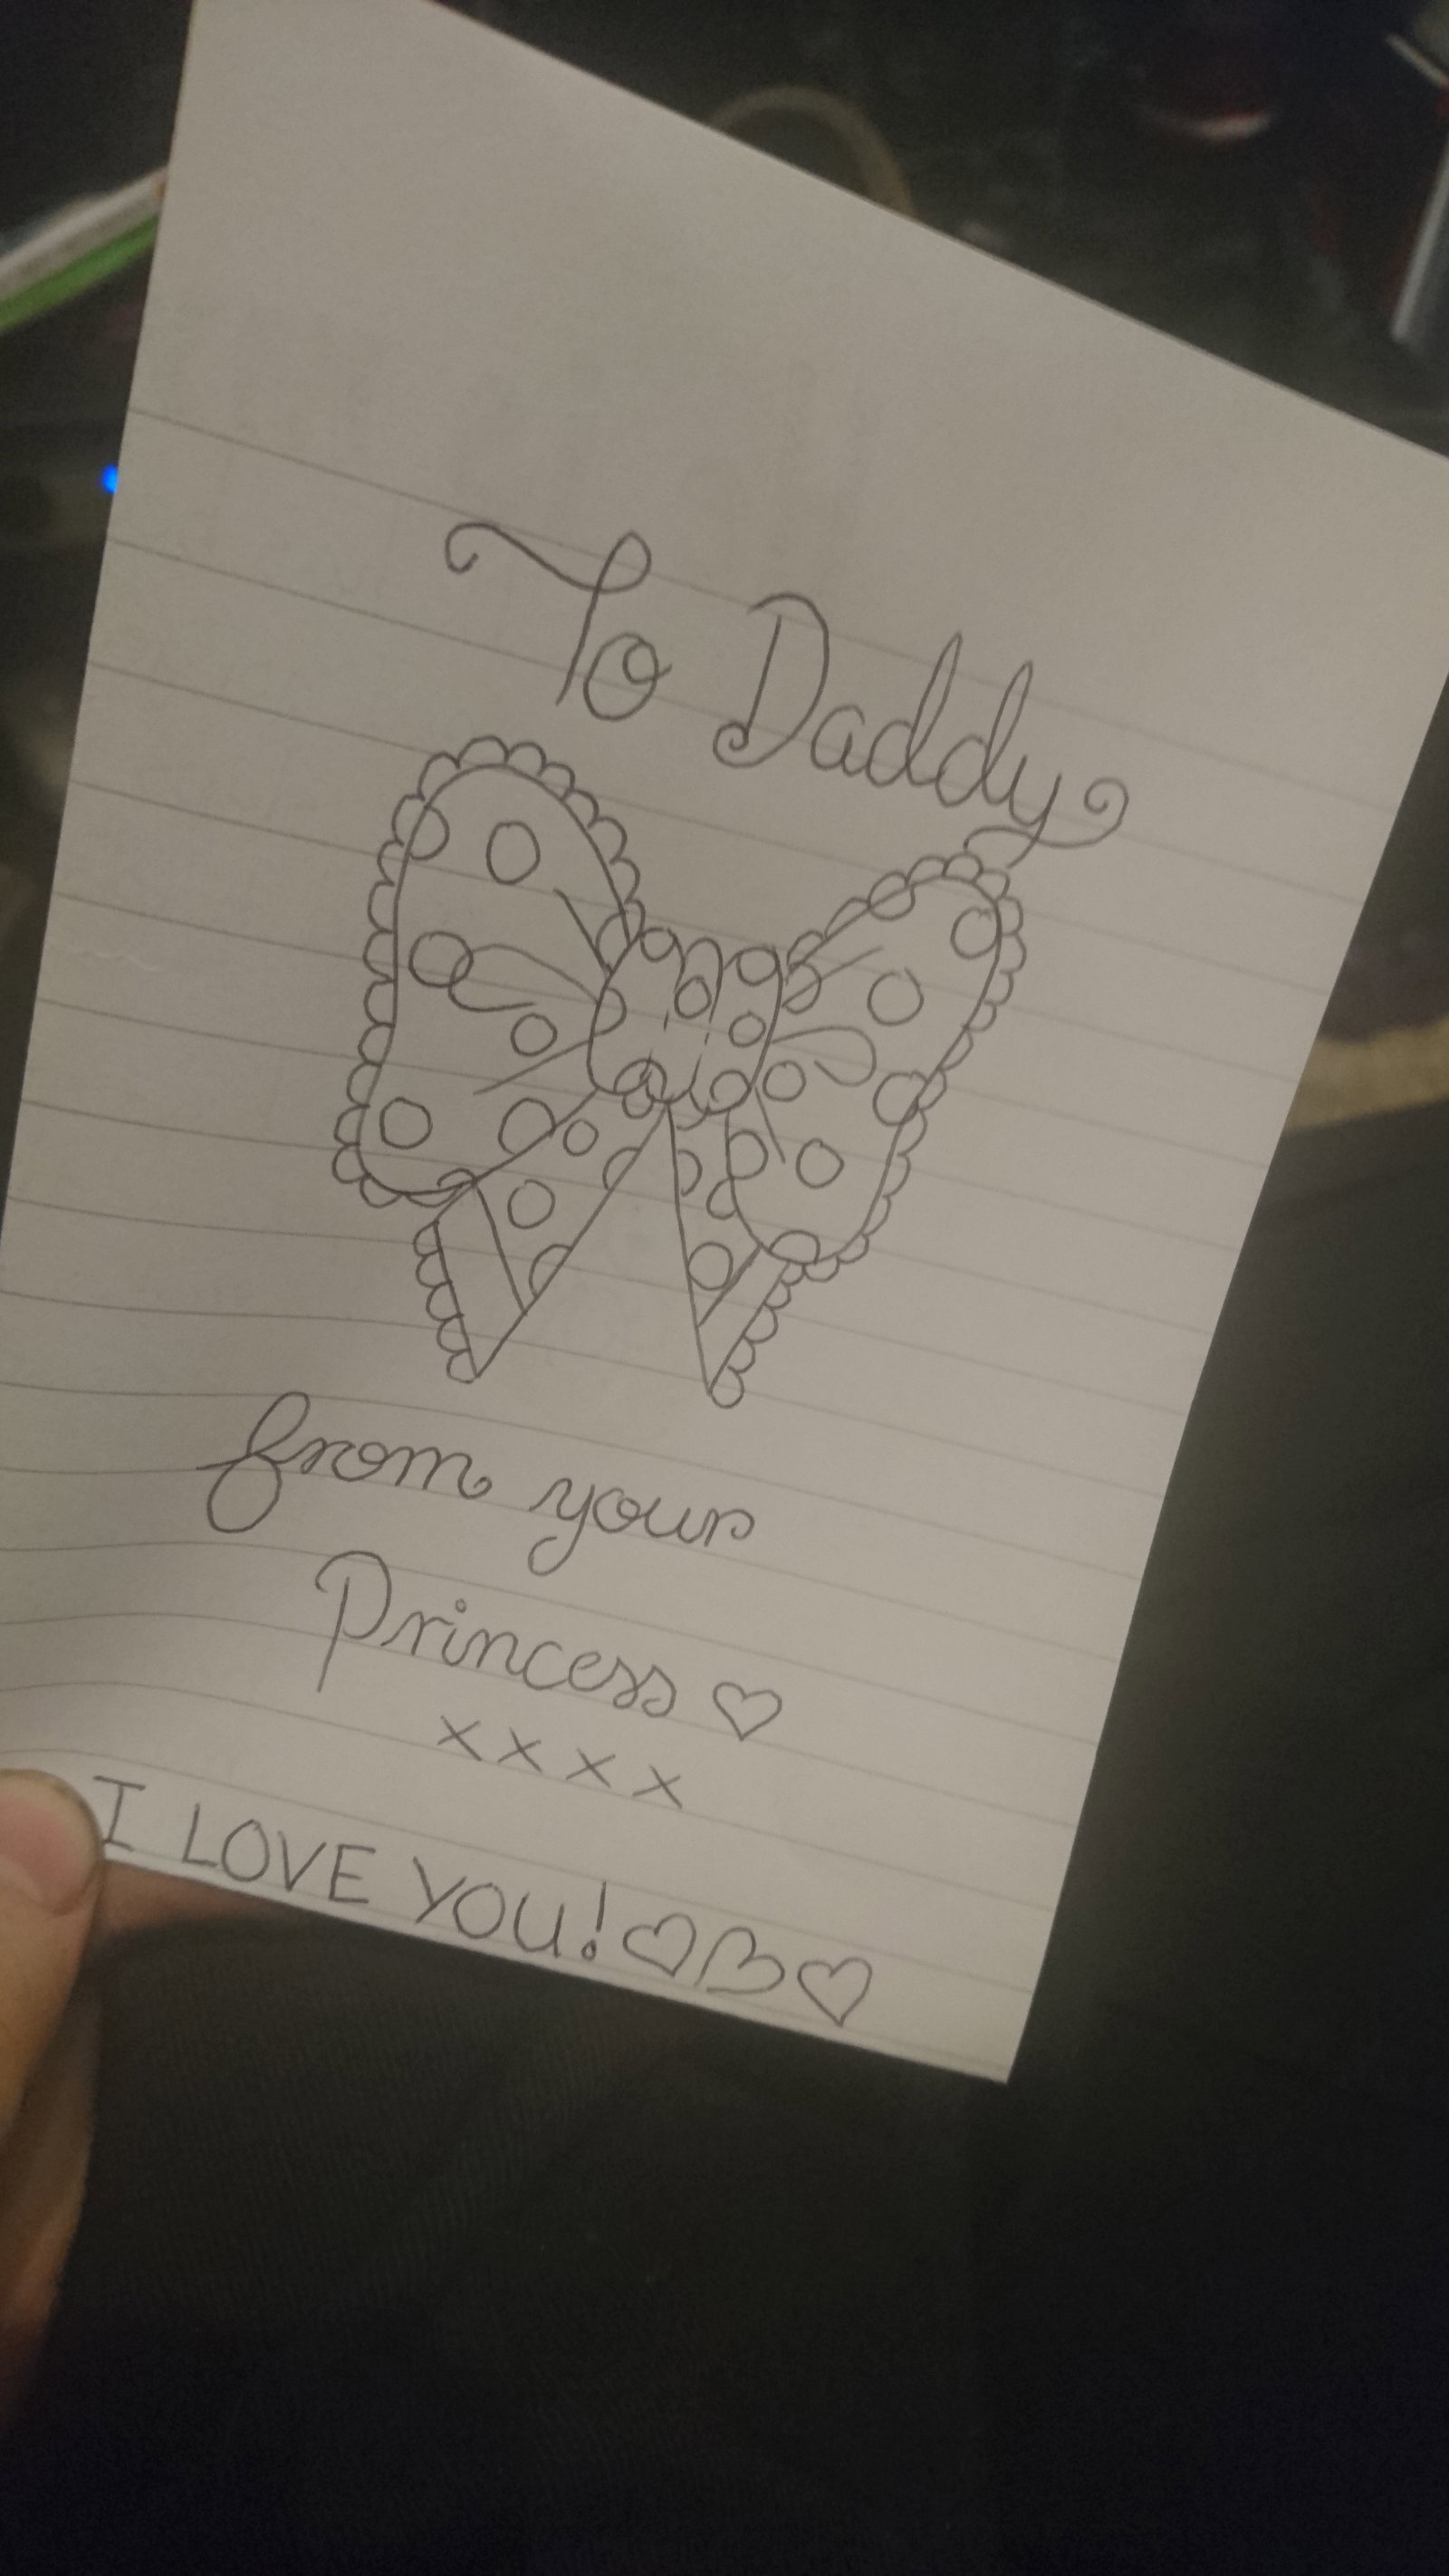 Watch the Photo by sexylittlesecret with the username @sexylittlesecret, who is a verified user, posted on February 4, 2017 and the text says 'When princess leaves you things like this. I’m one lucky daddy! 
I’ll make sure she gets a nice little treat tonight!!
~Daddy #dd/lg  #blog  #dd/lg  #lifestyle  #daddy  #daddy  #kink  #daddyslittlegirl  #daddysgirl  #daddysprincess  #daddys  #little..'